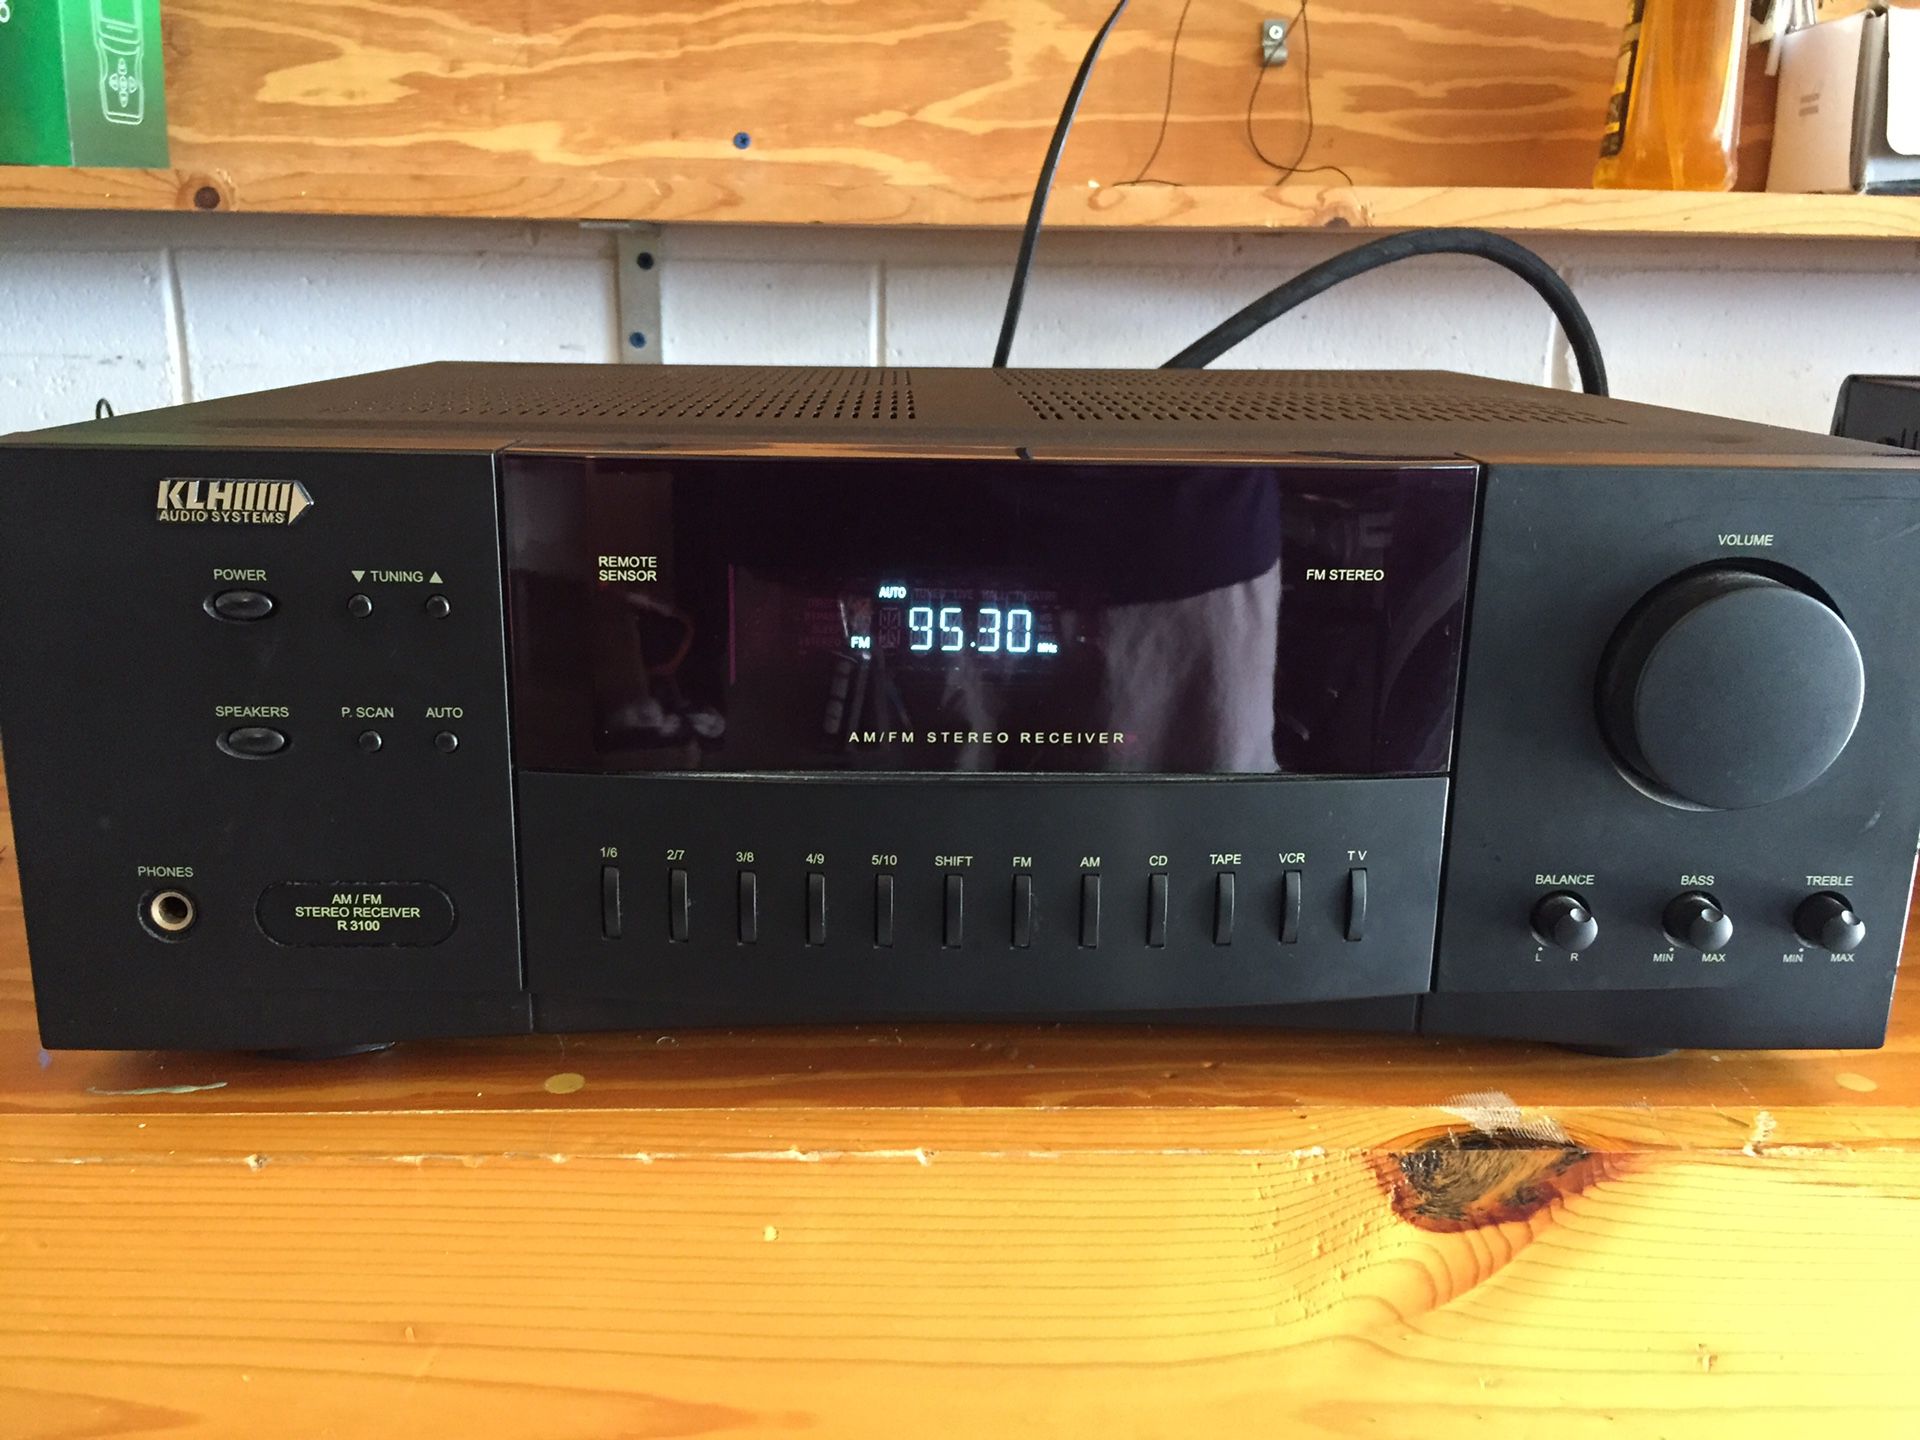 Nice stereo receiver all in one